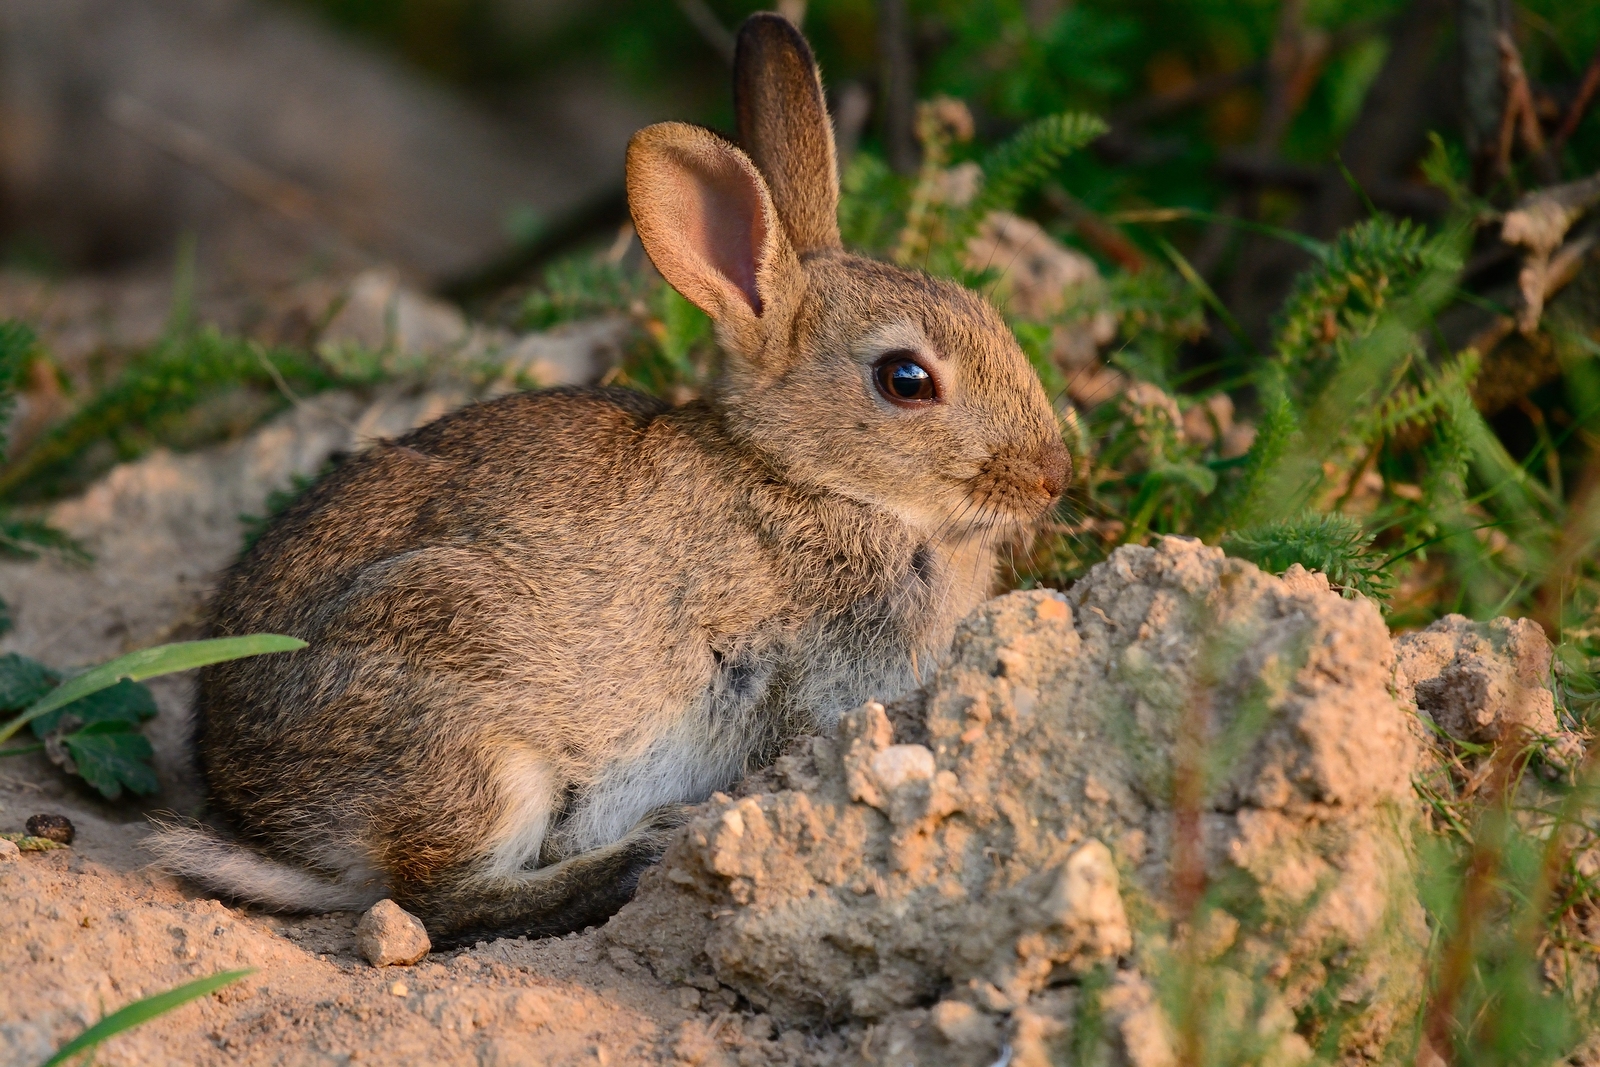 What To Do If You Find A Baby Rabbit In Your Yard